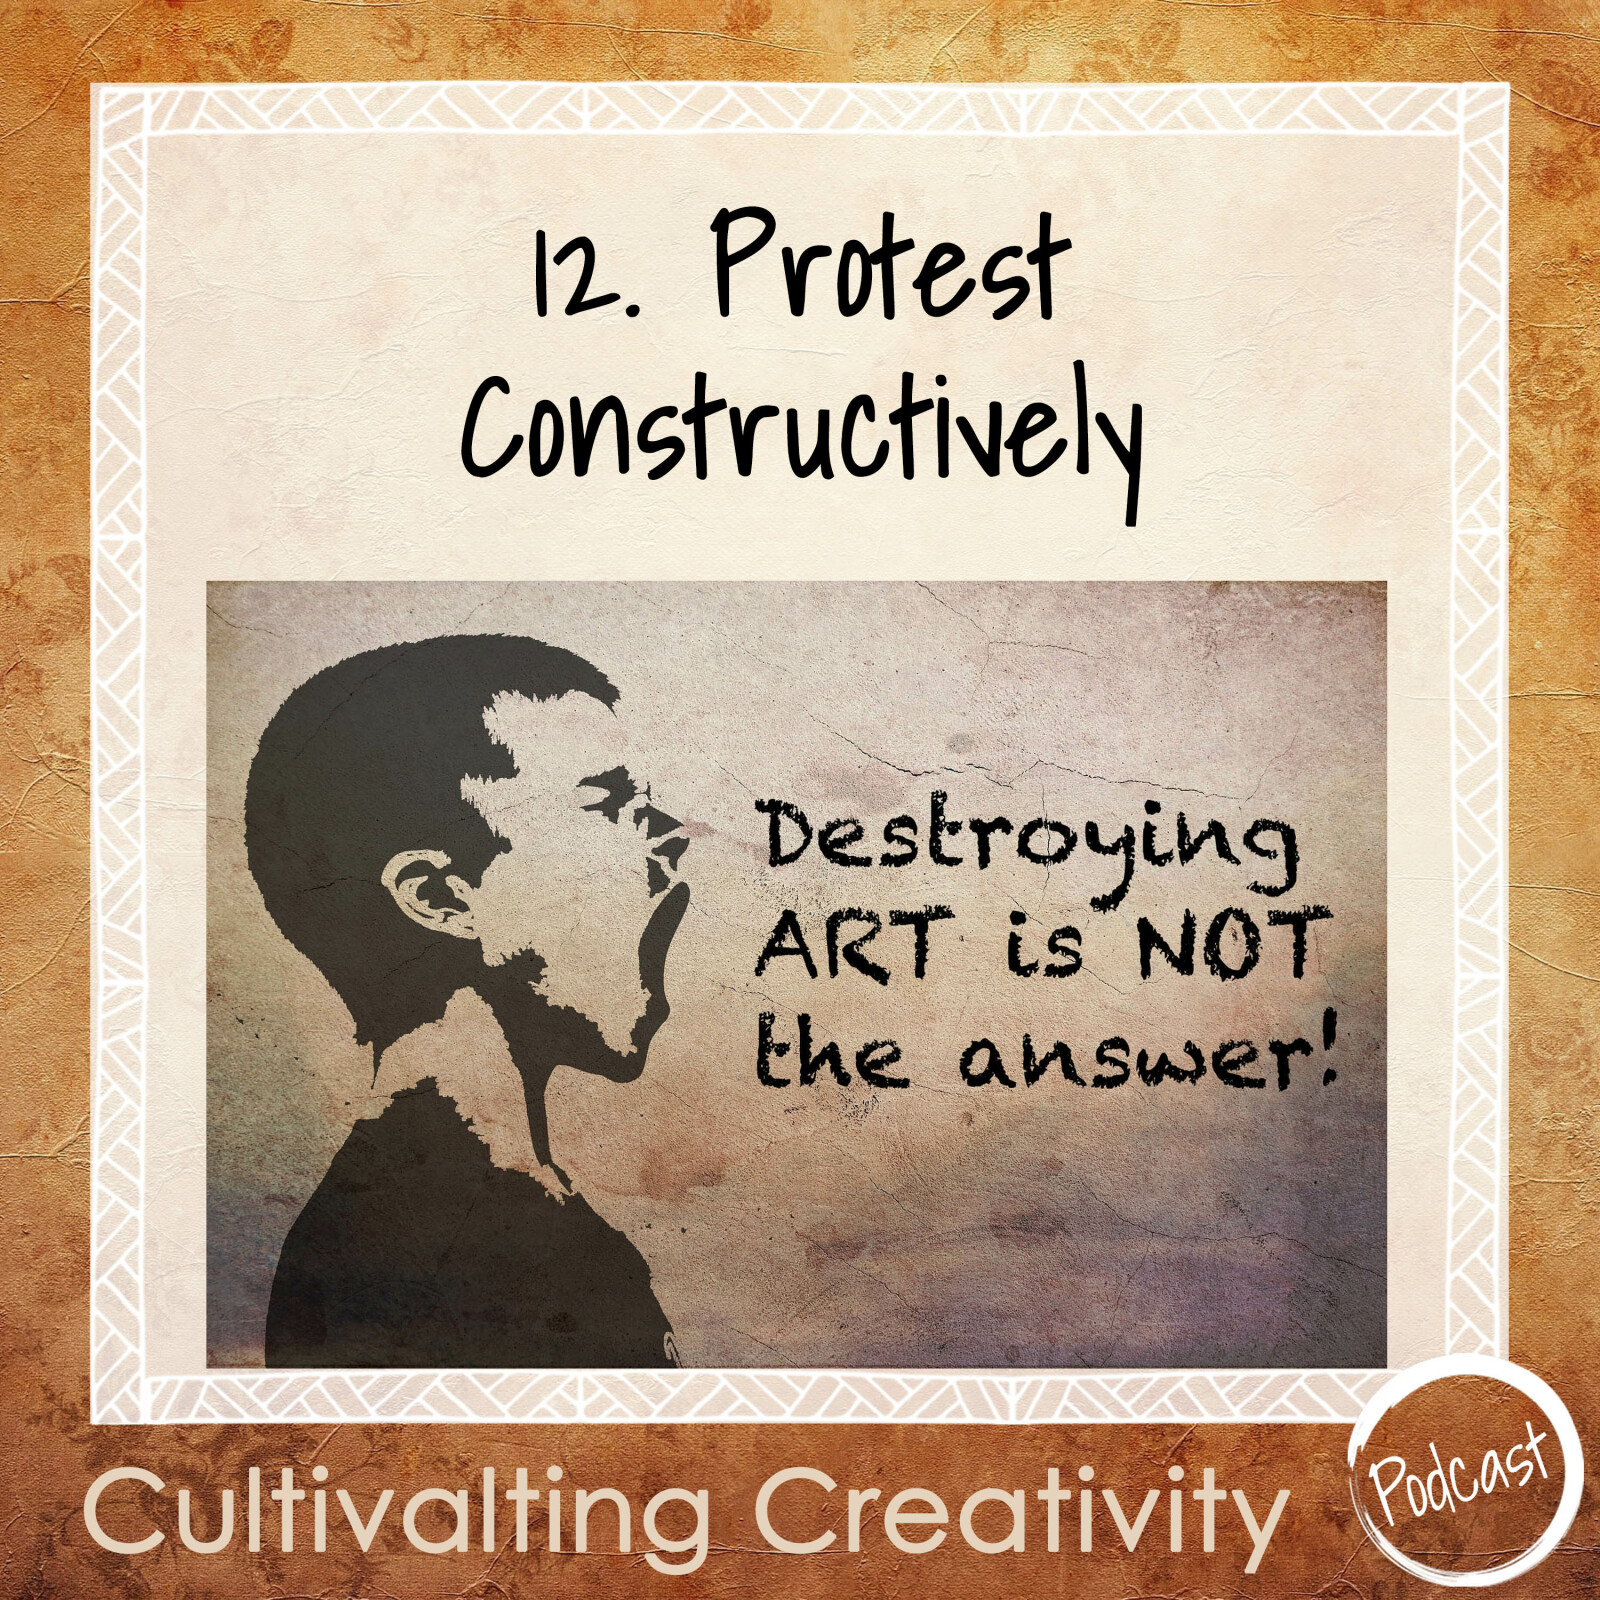 12. Protest Constructively